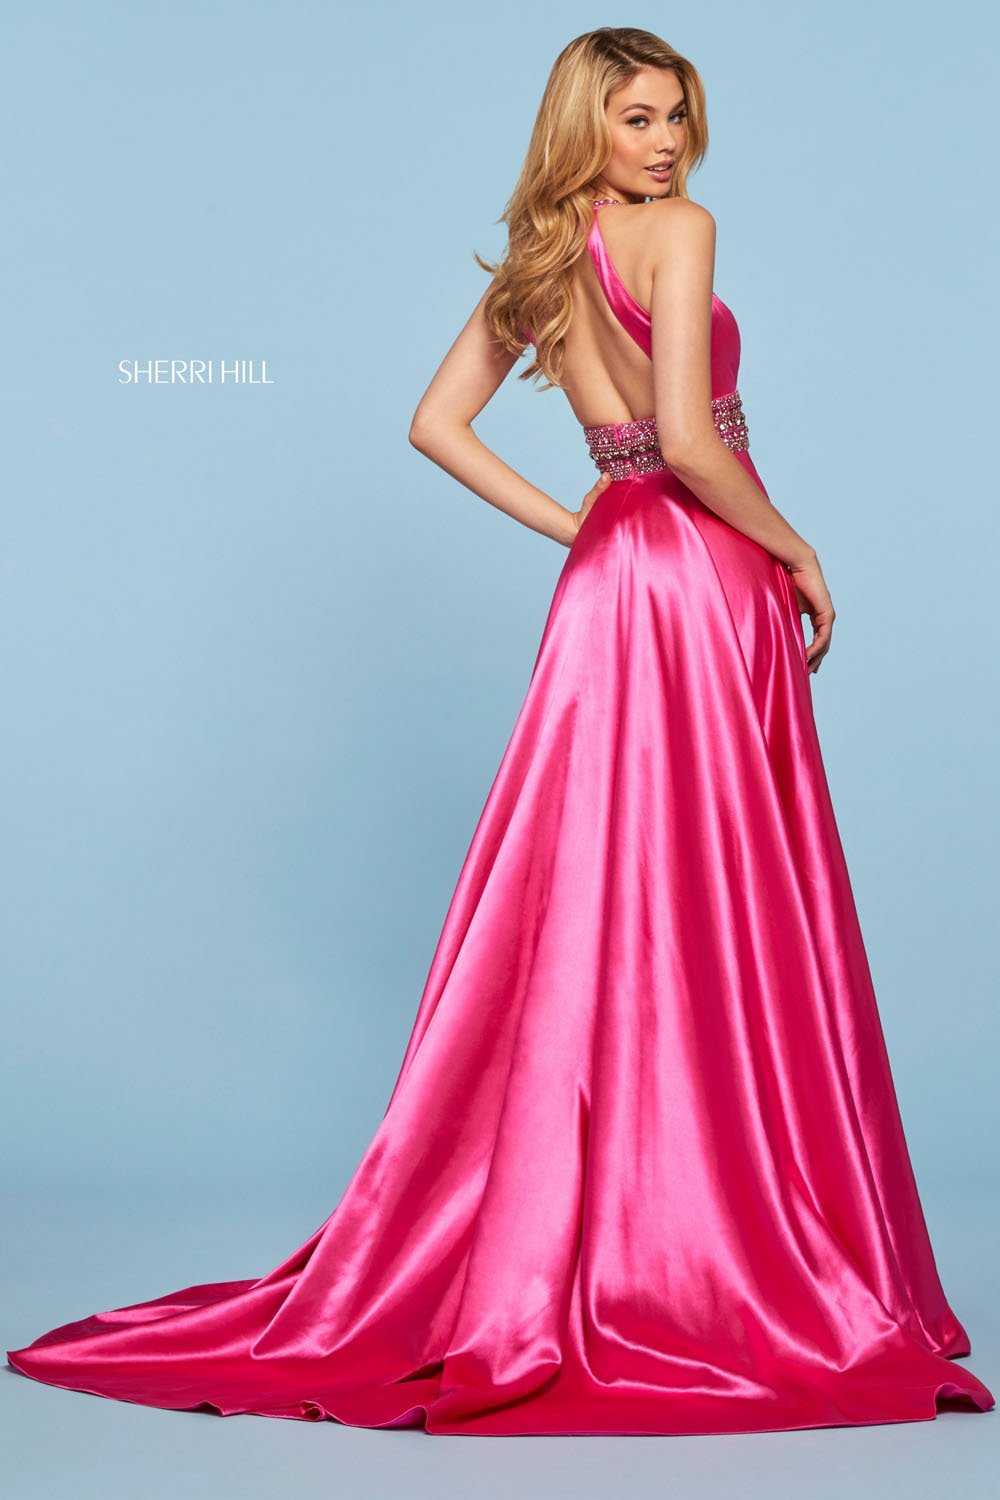 Sherri Hill 53306 dress images in these colors: Teal, Royal, Rose, Lilac, Fuchsia, Vintage Coral, Mocha, Red.